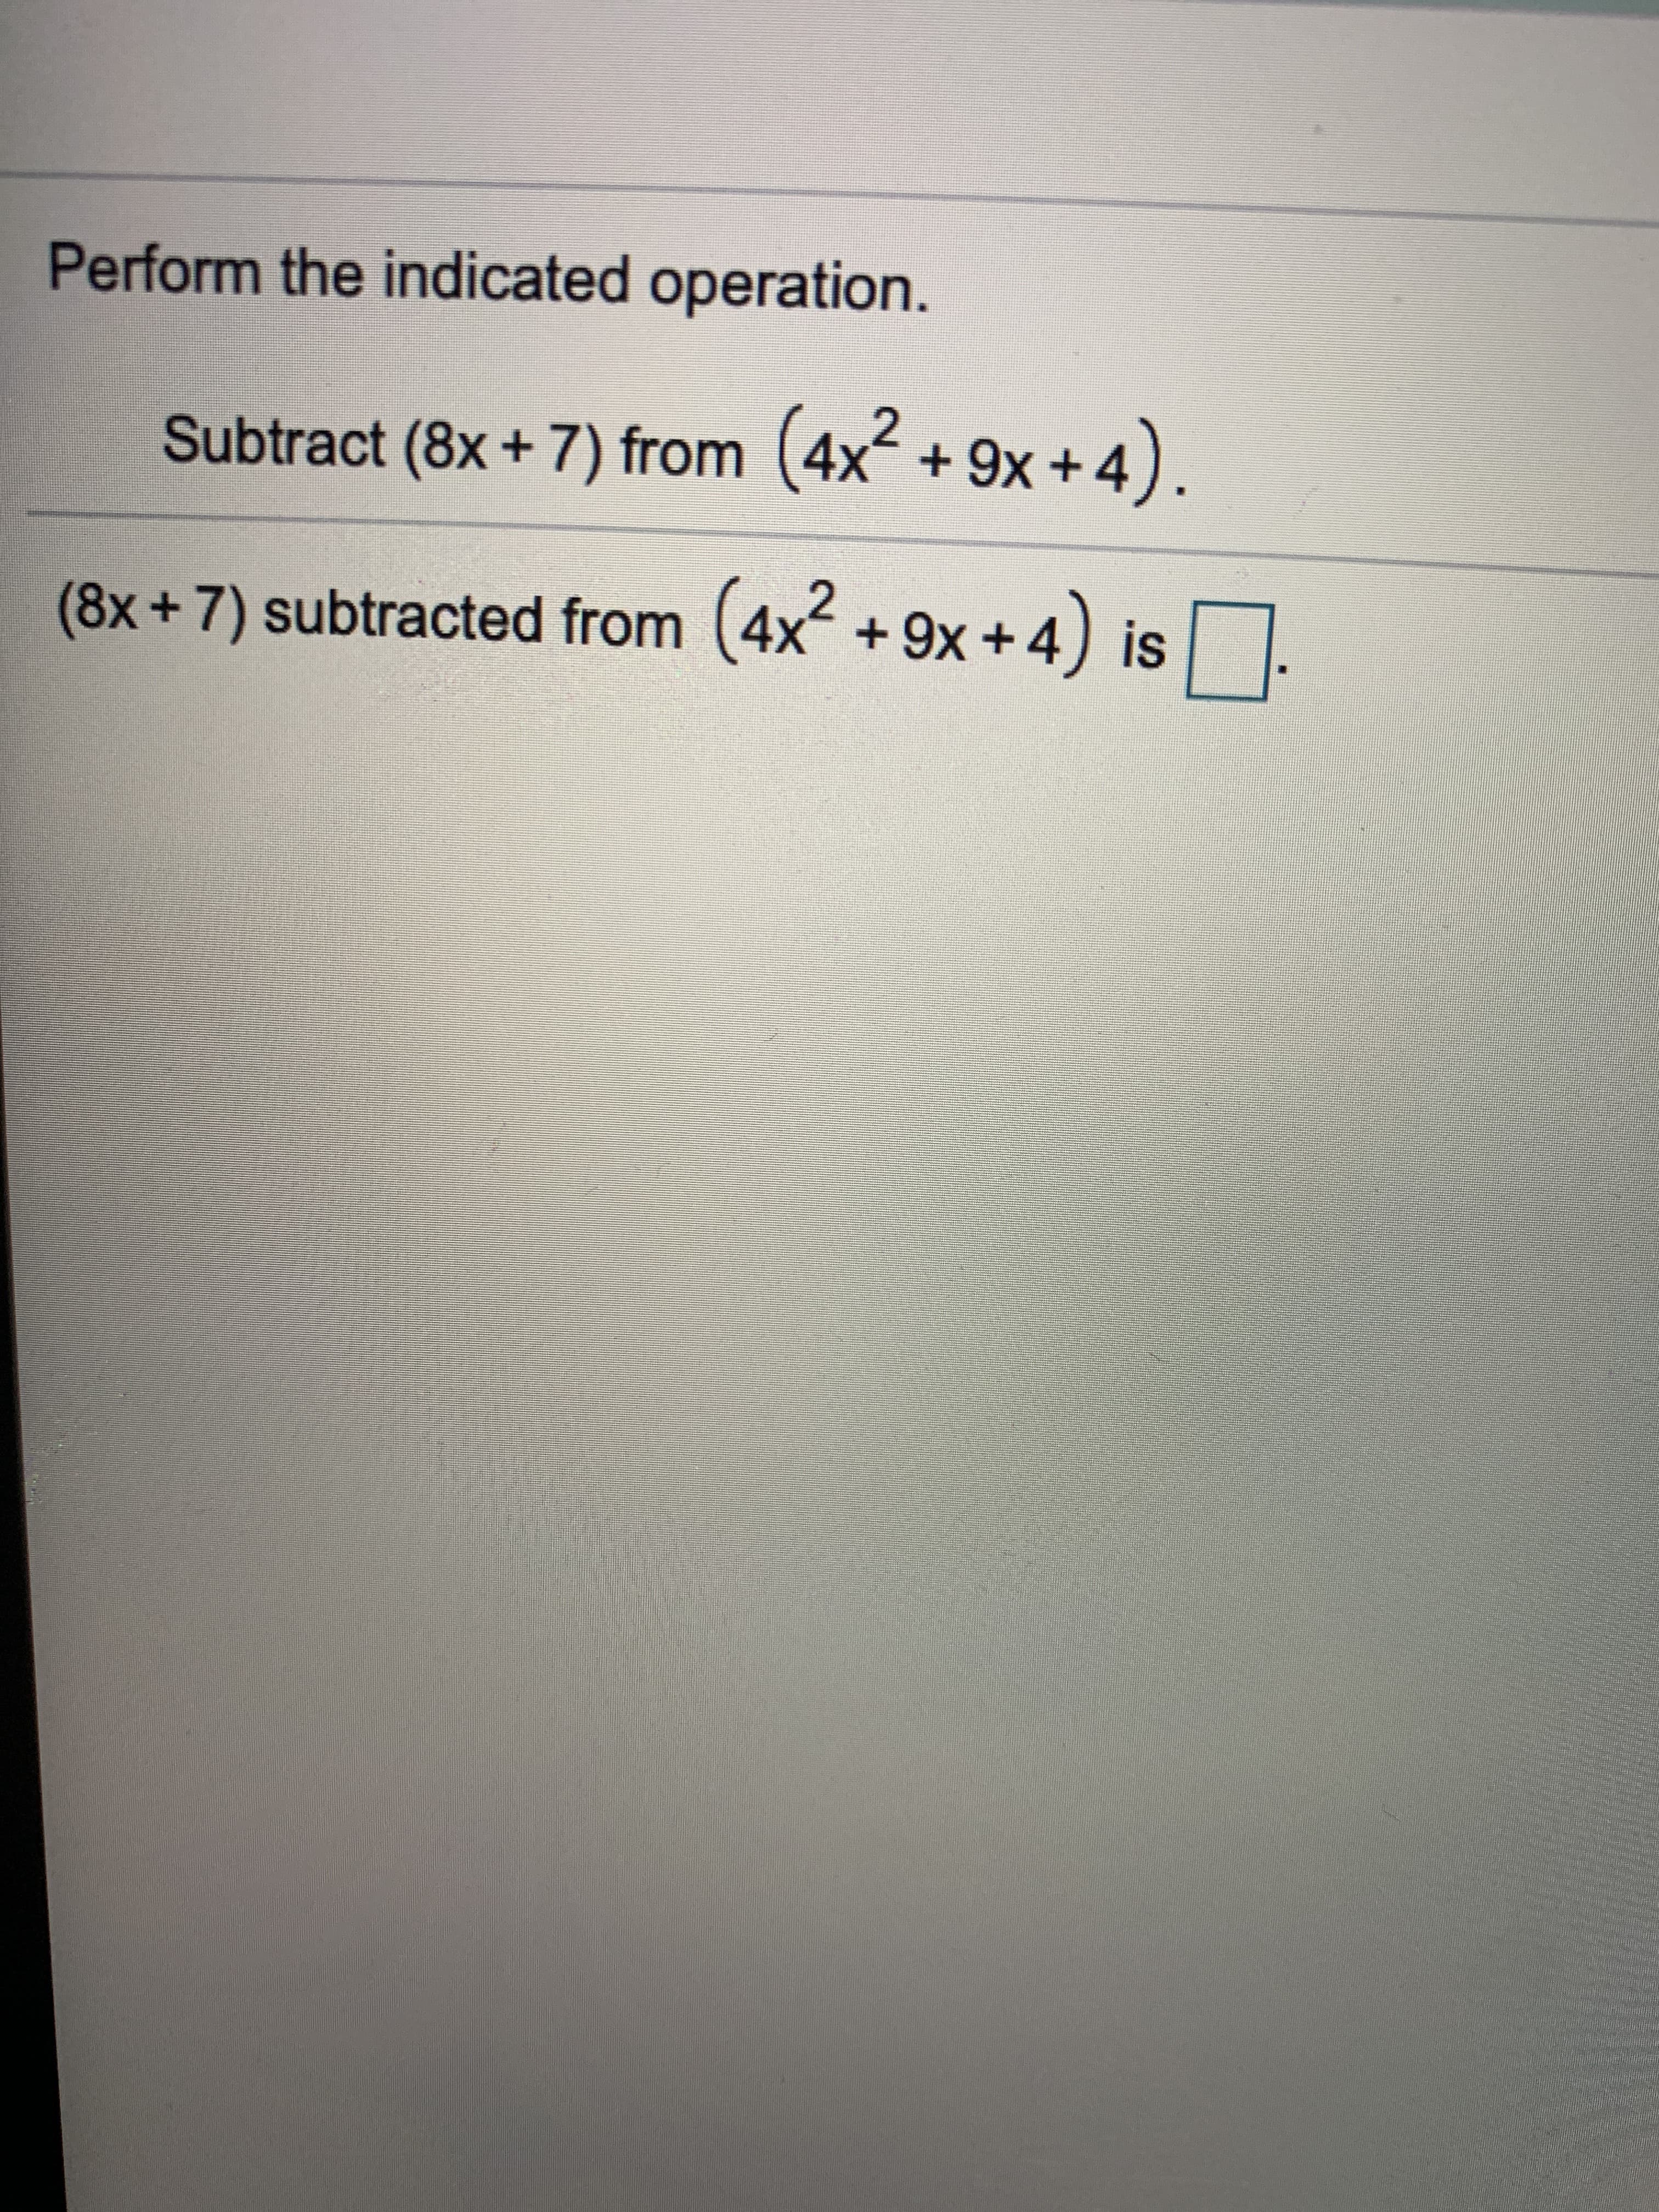 Perform the indicated operation.
Subtract (8x+7) from (4x+9x+4).
(8x+7) subtracted from (4x +9x+ 4) is
